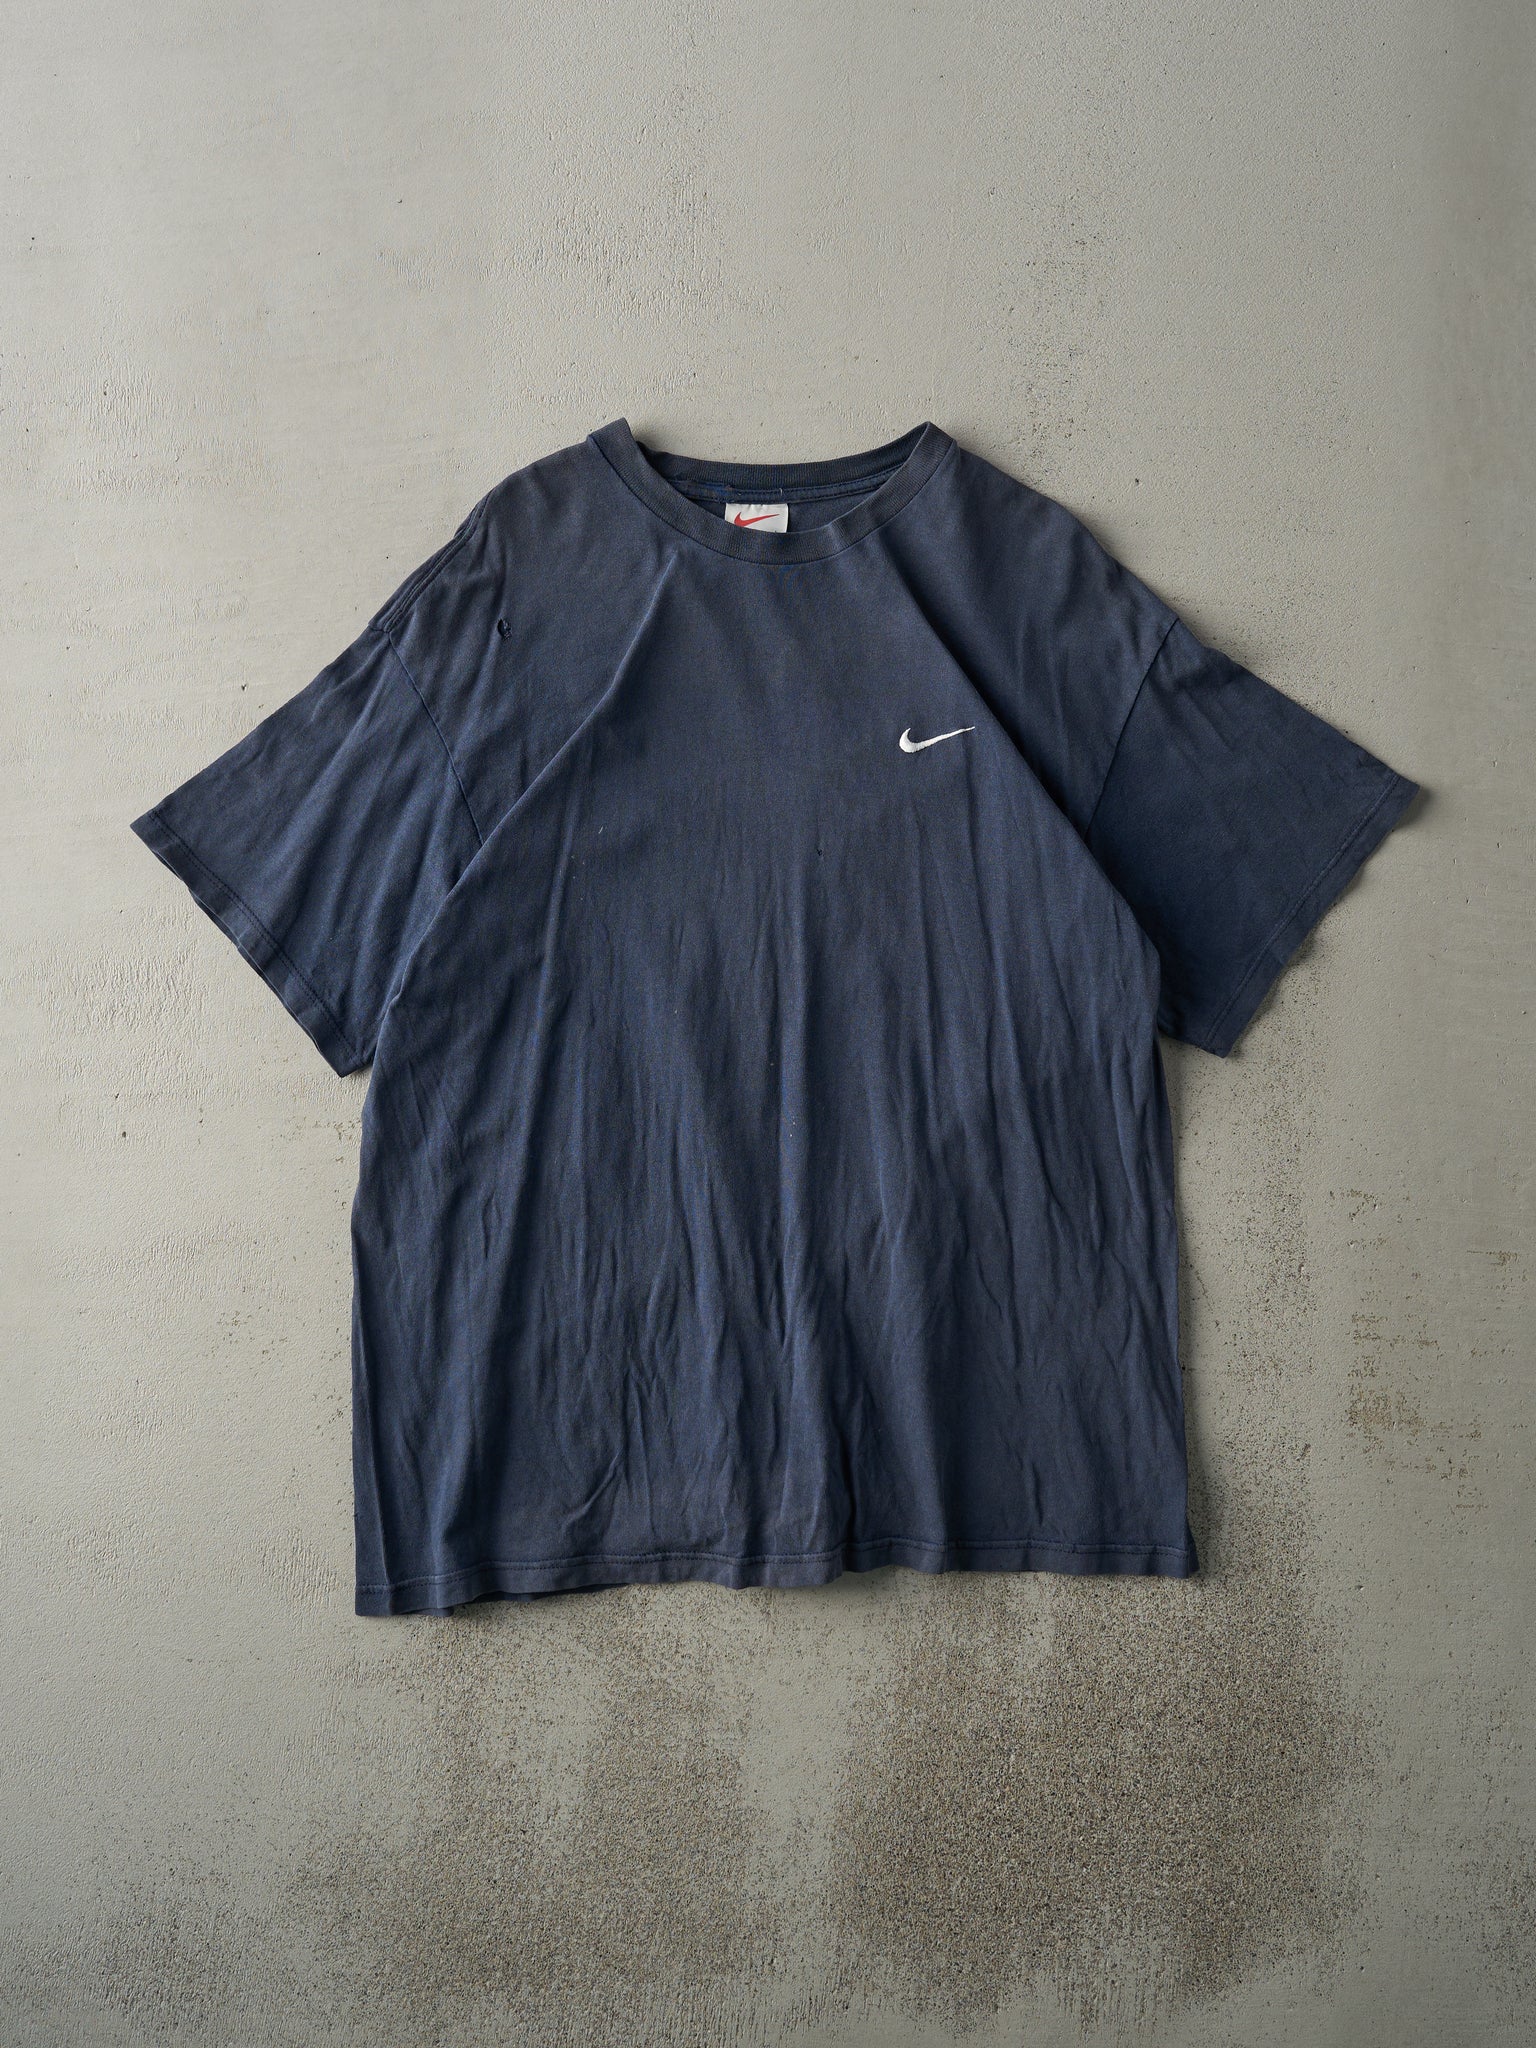 Vintage 90s Faded Navy Blue Nike Embroidered Swoosh Tee (L)